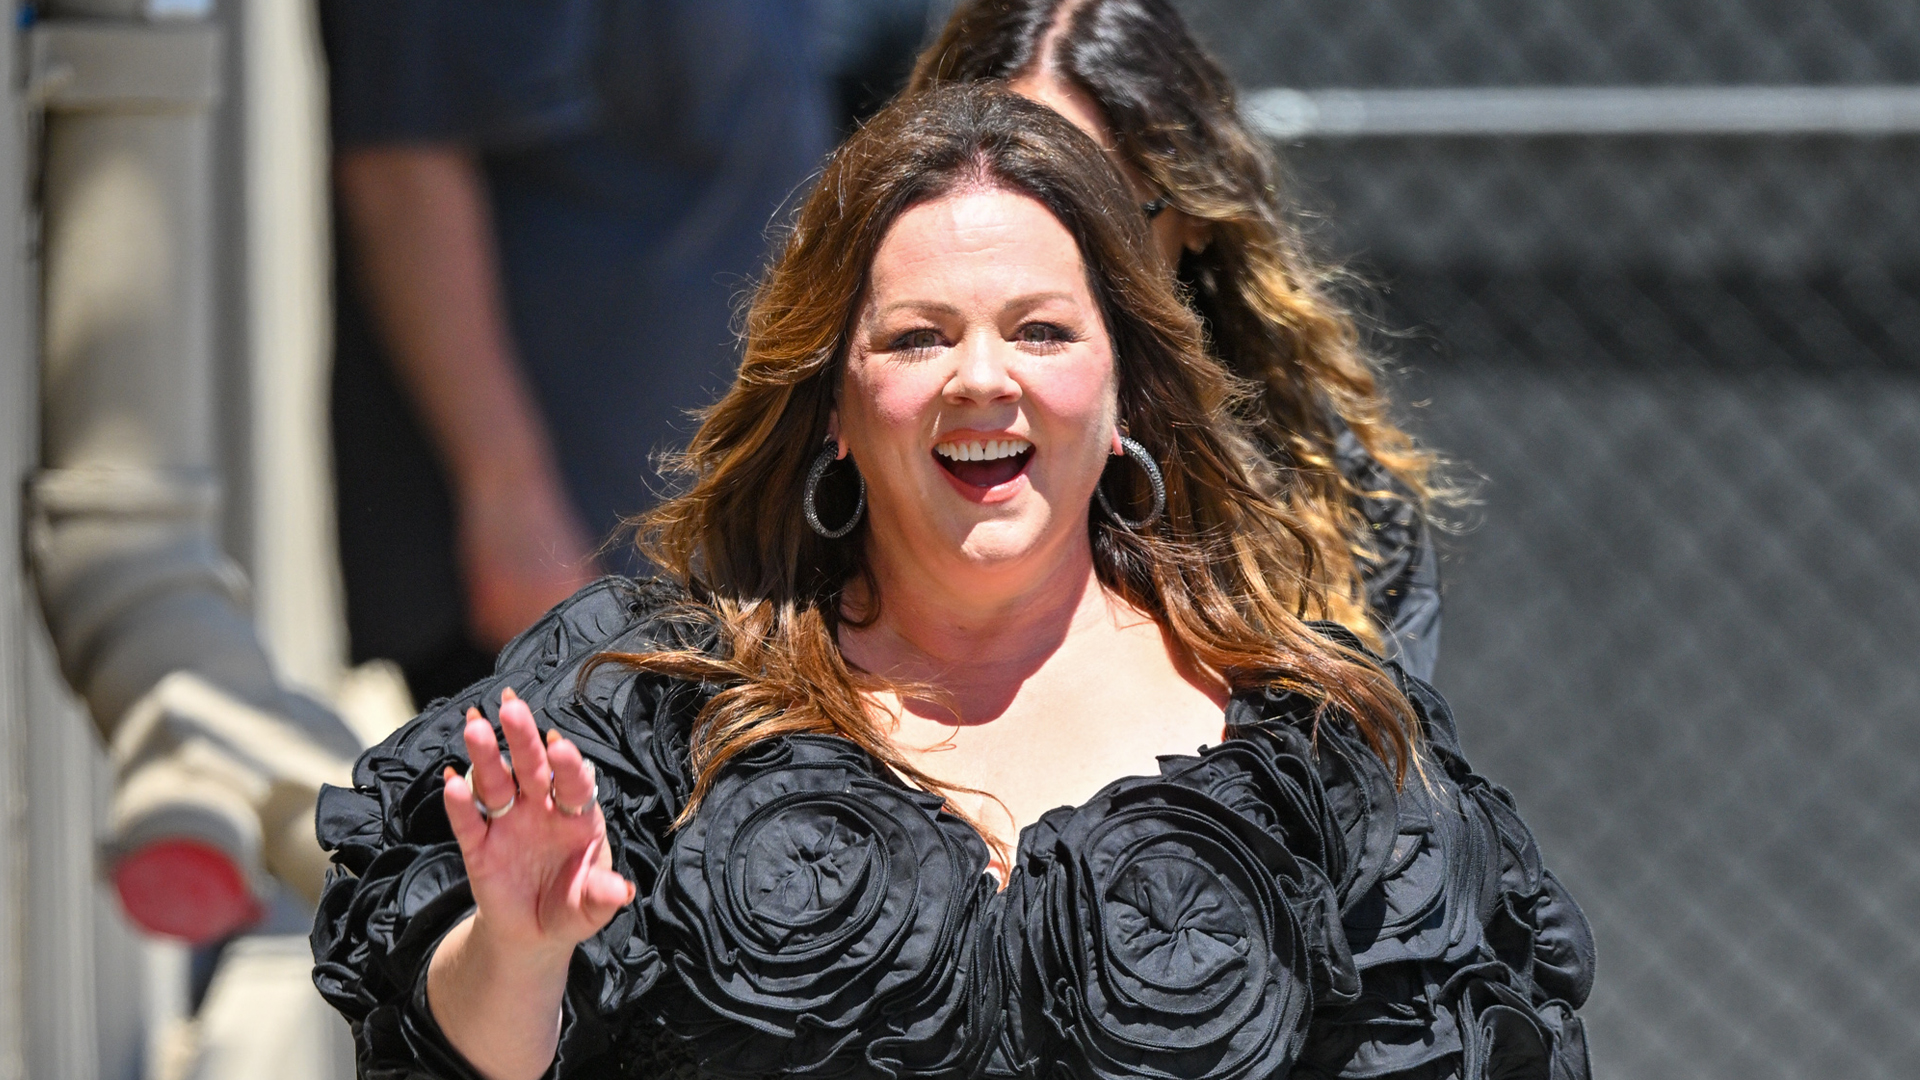 Melissa McCarthy shows 75-lb weight loss in tight black flower dress as star carries ‘pizza’ bag to film Jimmy Kimmel [Video]